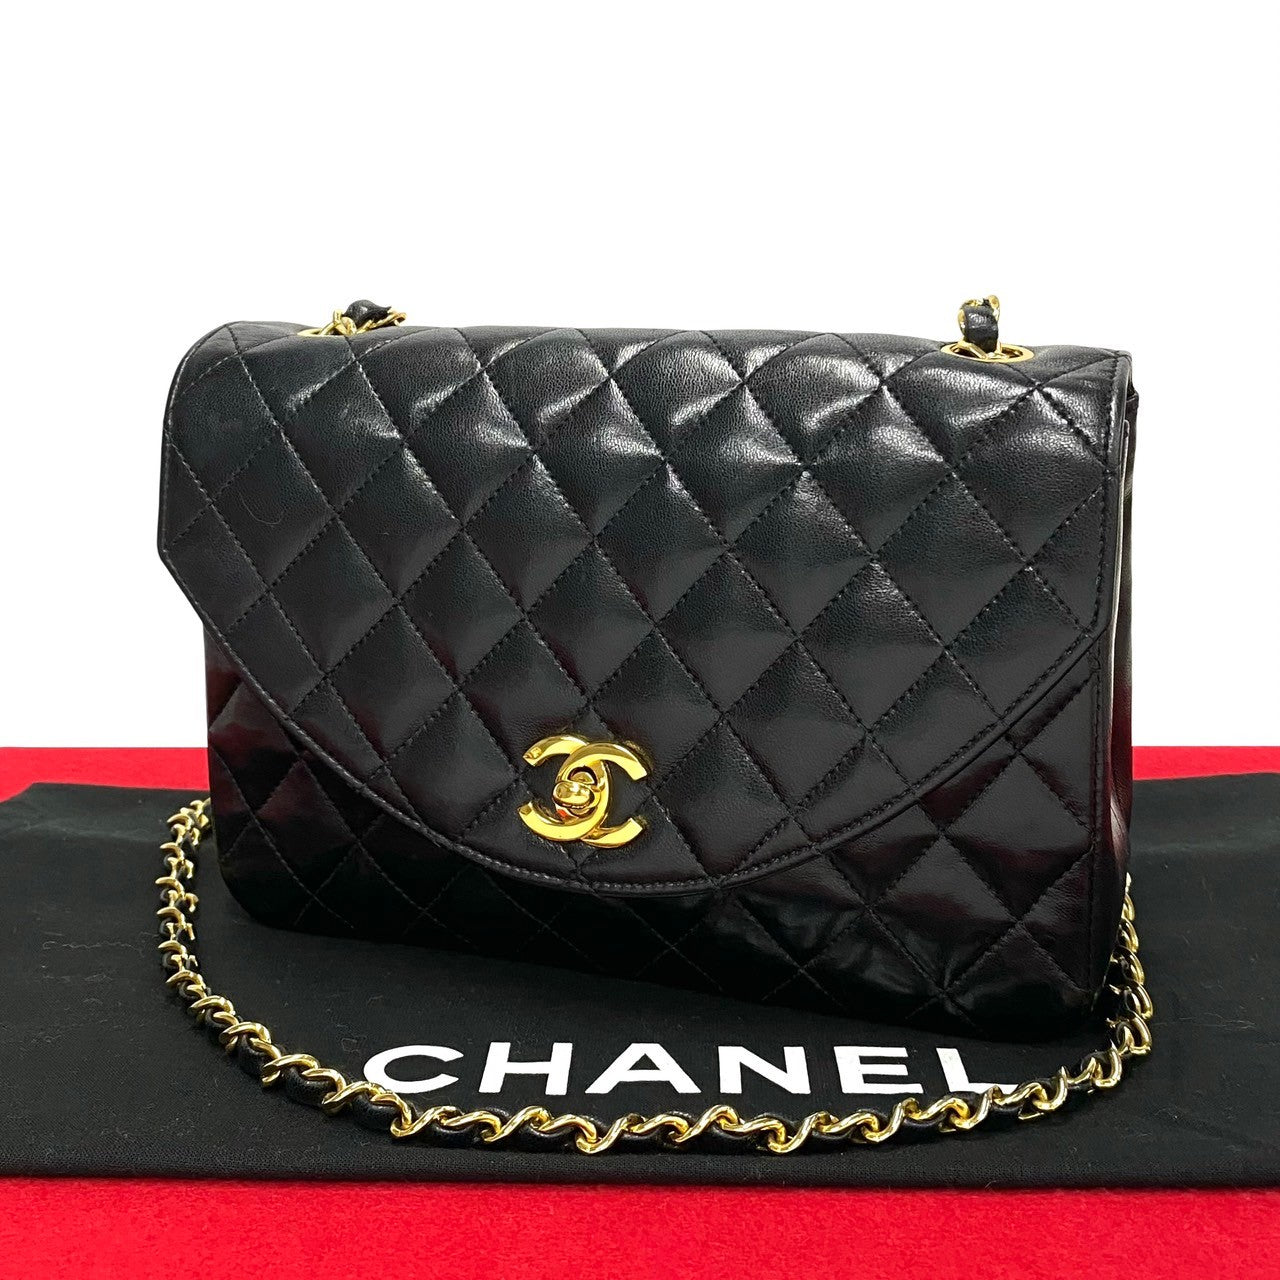 Chanel CC Matelasse Flap Bag  Leather Crossbody Bag in Good condition